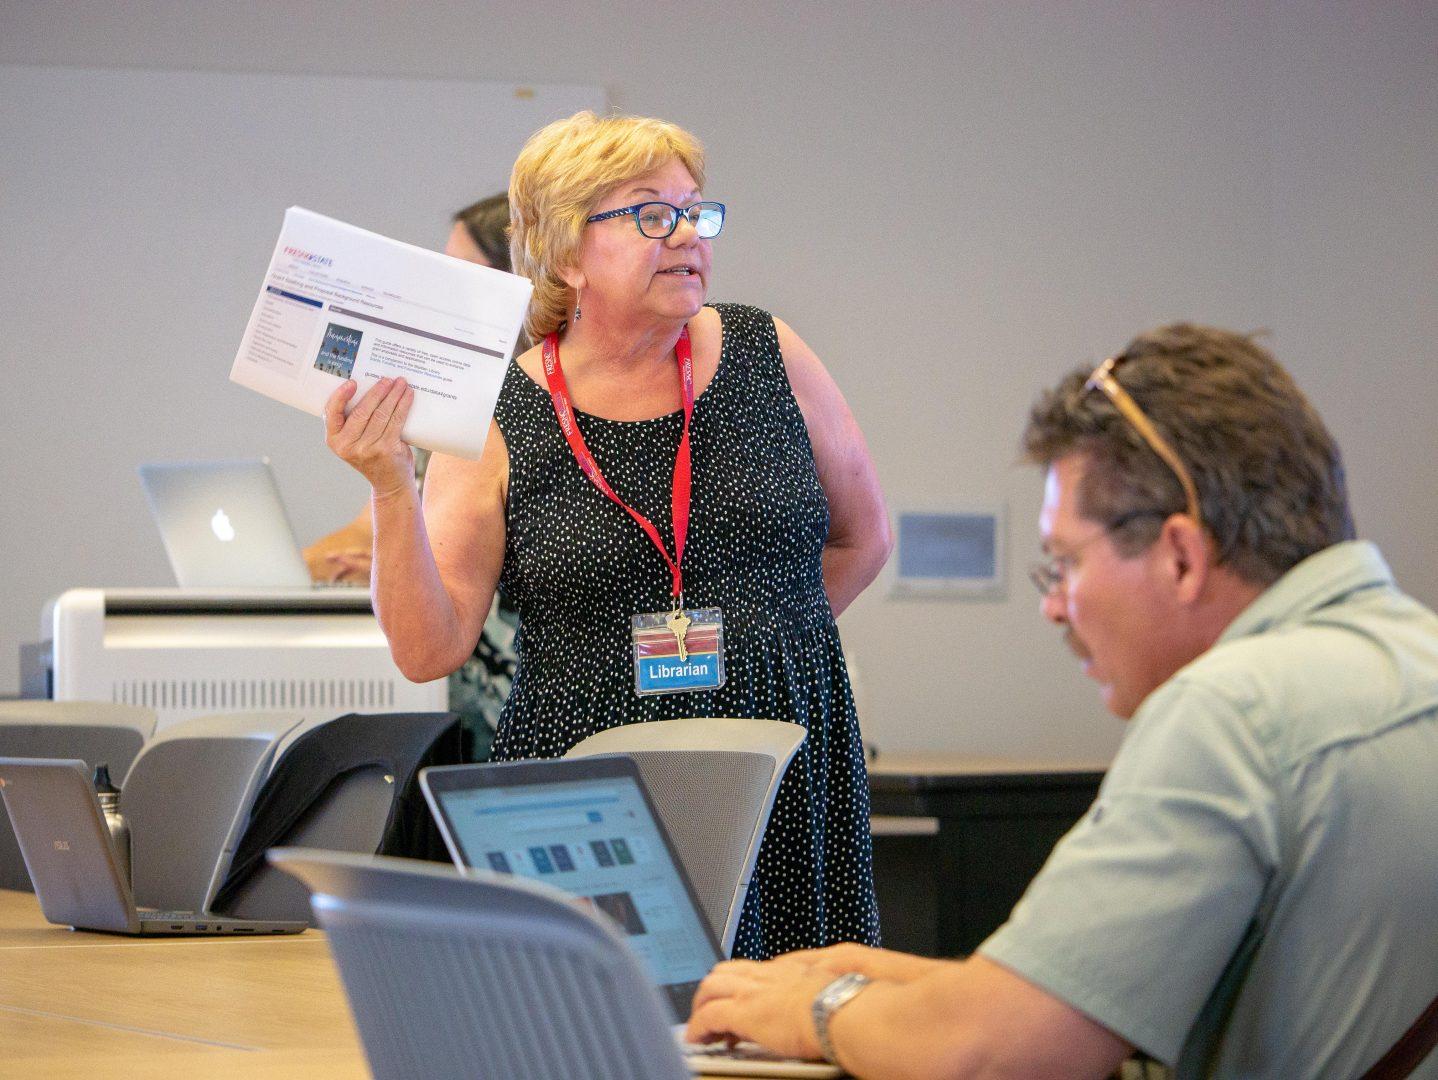 Fresno State librarian Jane Magee shows resources to attendees at a July 19 workshop. Magee was part of a team presenting on a new funding database that is now available to faculty, students and the community at the Henry Madden Library (photo courtesy of the Henry Madden Library).